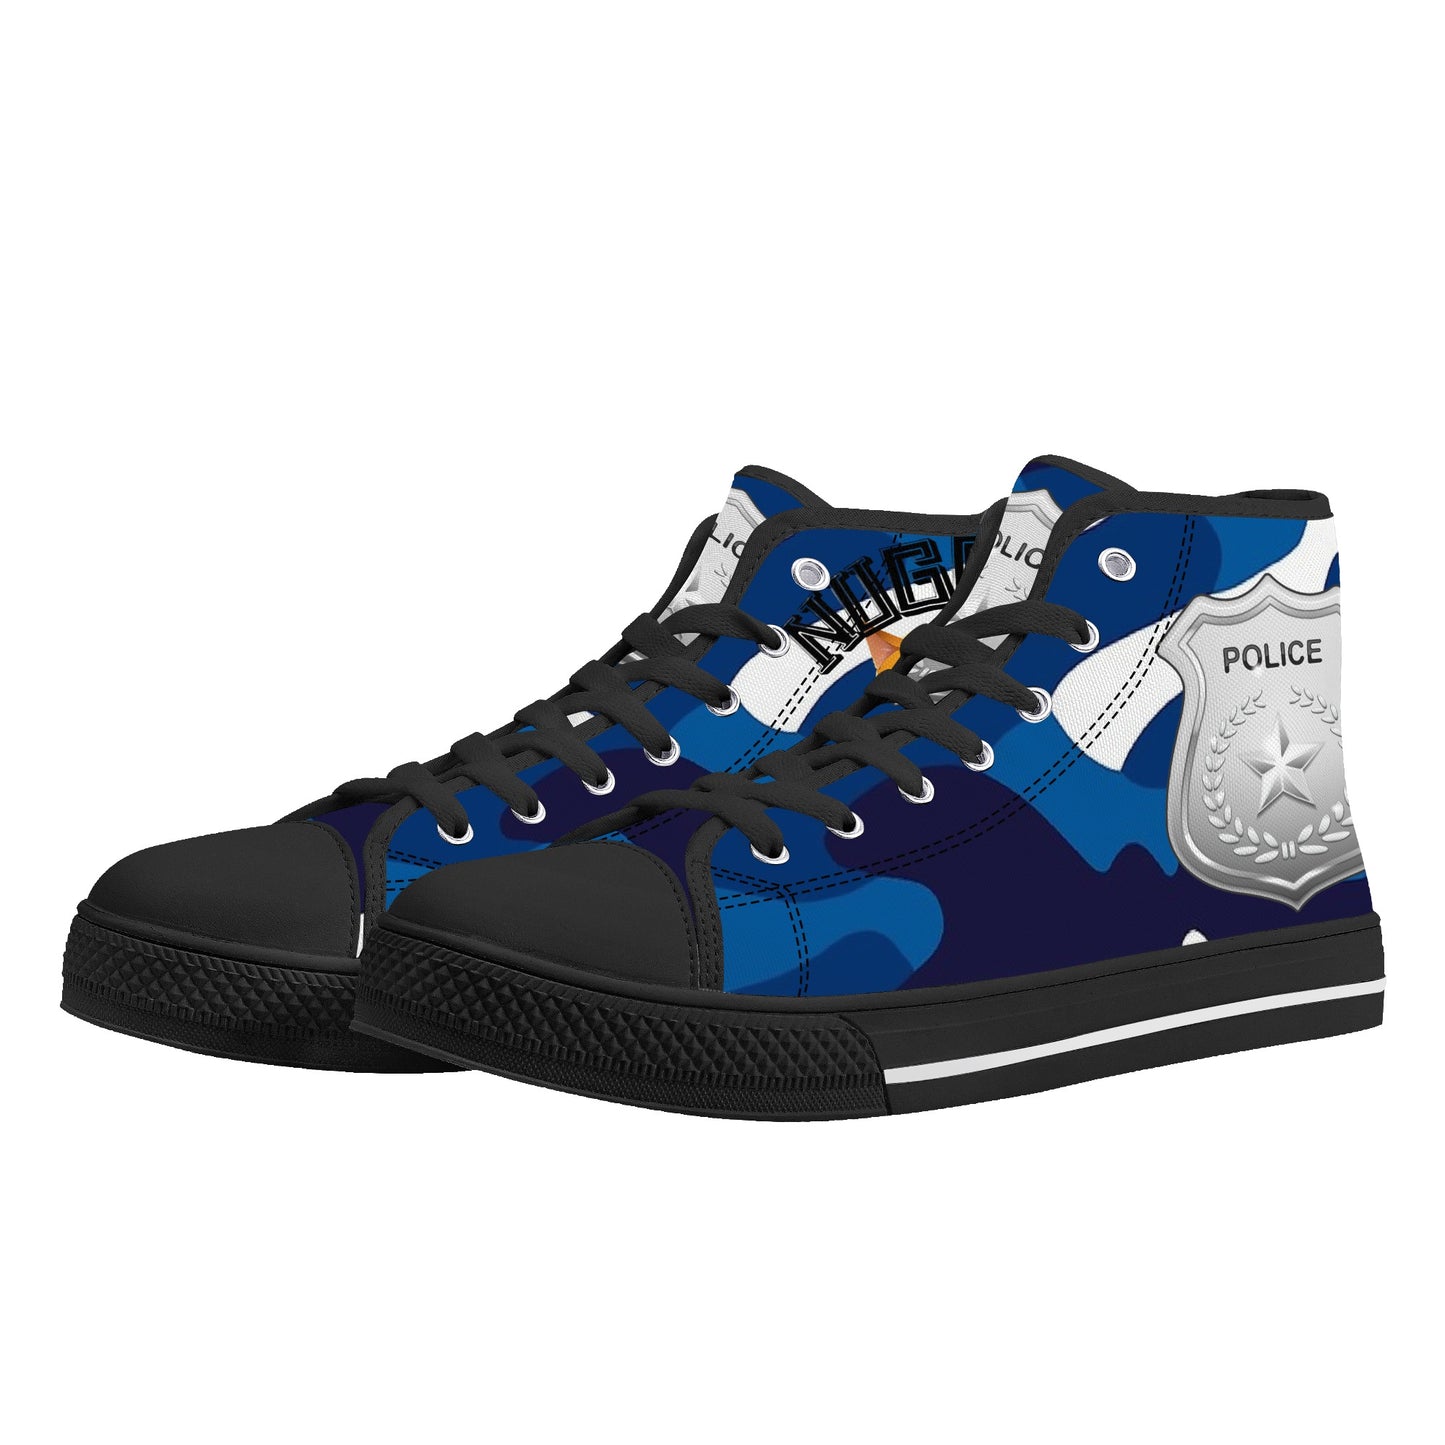 Stand out  with the  Nugget Army Police Mens High Top Canvas Shoes  available at Hey Nugget. Grab yours today!